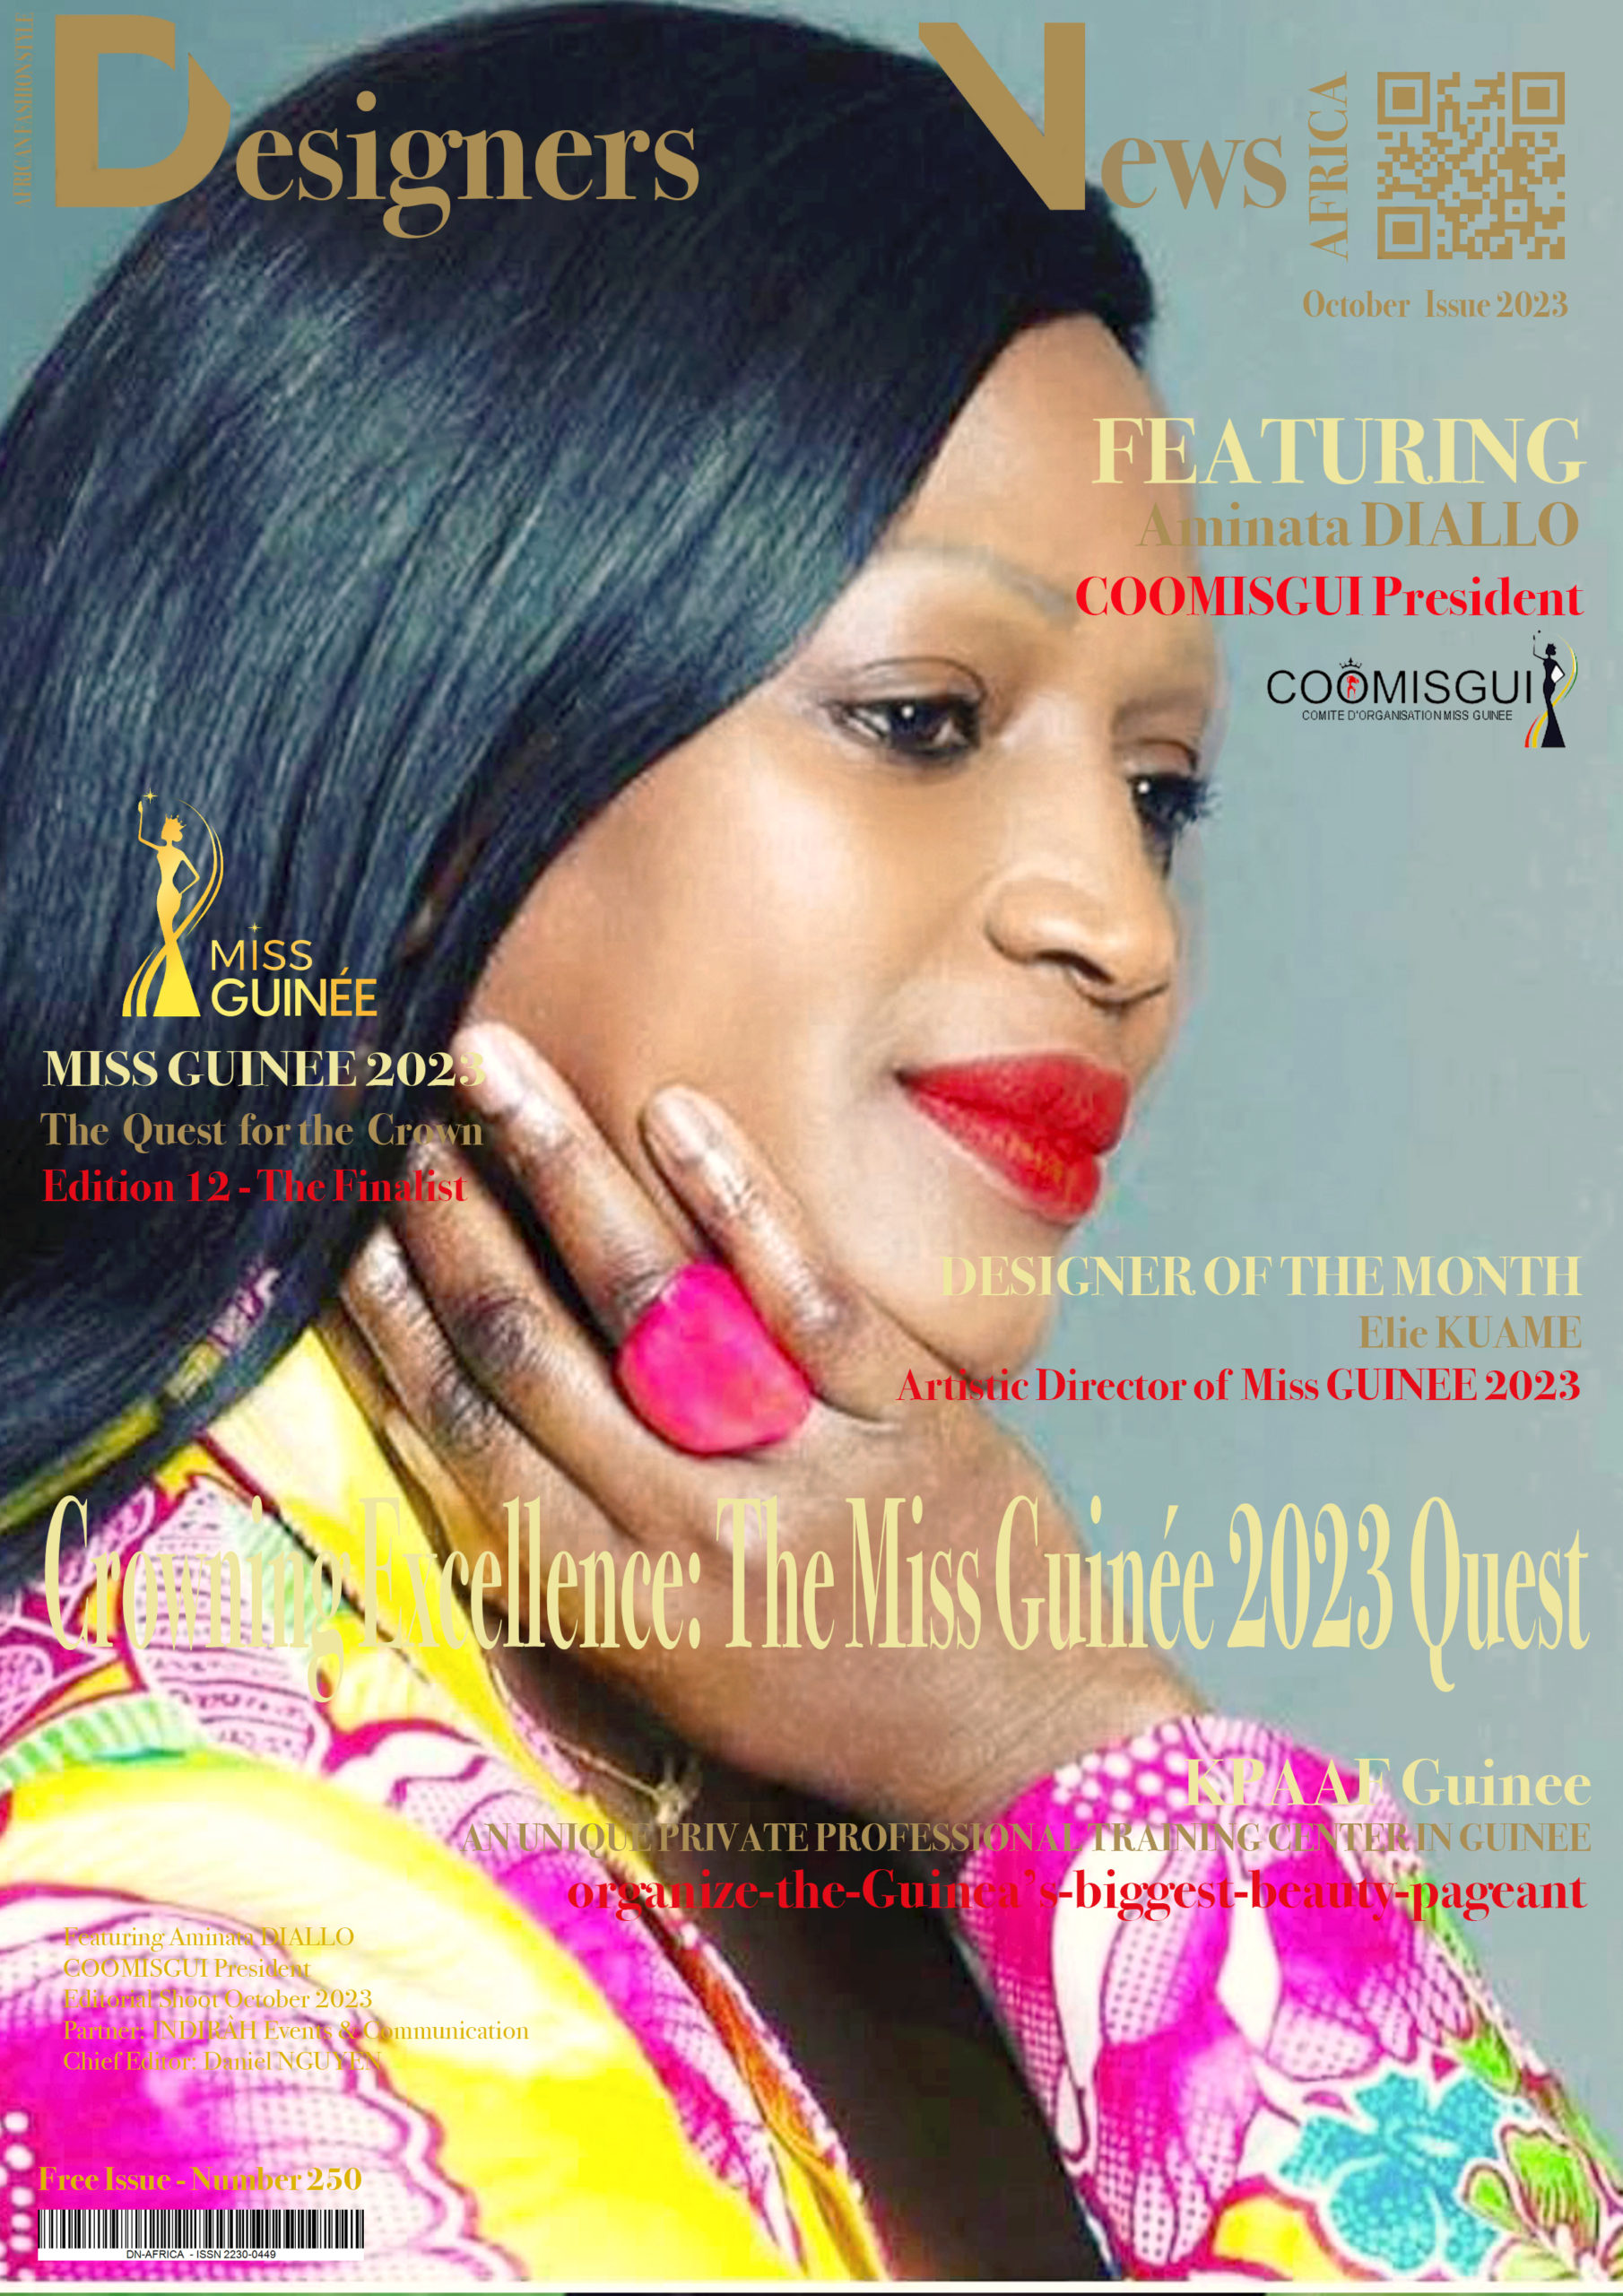 AFRICA-FASHION-STYLE-2490X3508-DN-AFRICA-COVER-NUMBER-250-OCT-2ND-2023-AMINATA-DIALLO-COOMISGUI-PRESIDENT-Crowning-Excellence-The-Miss-Guinée-2023-Quest-DN-AFRICA-Media-Partner